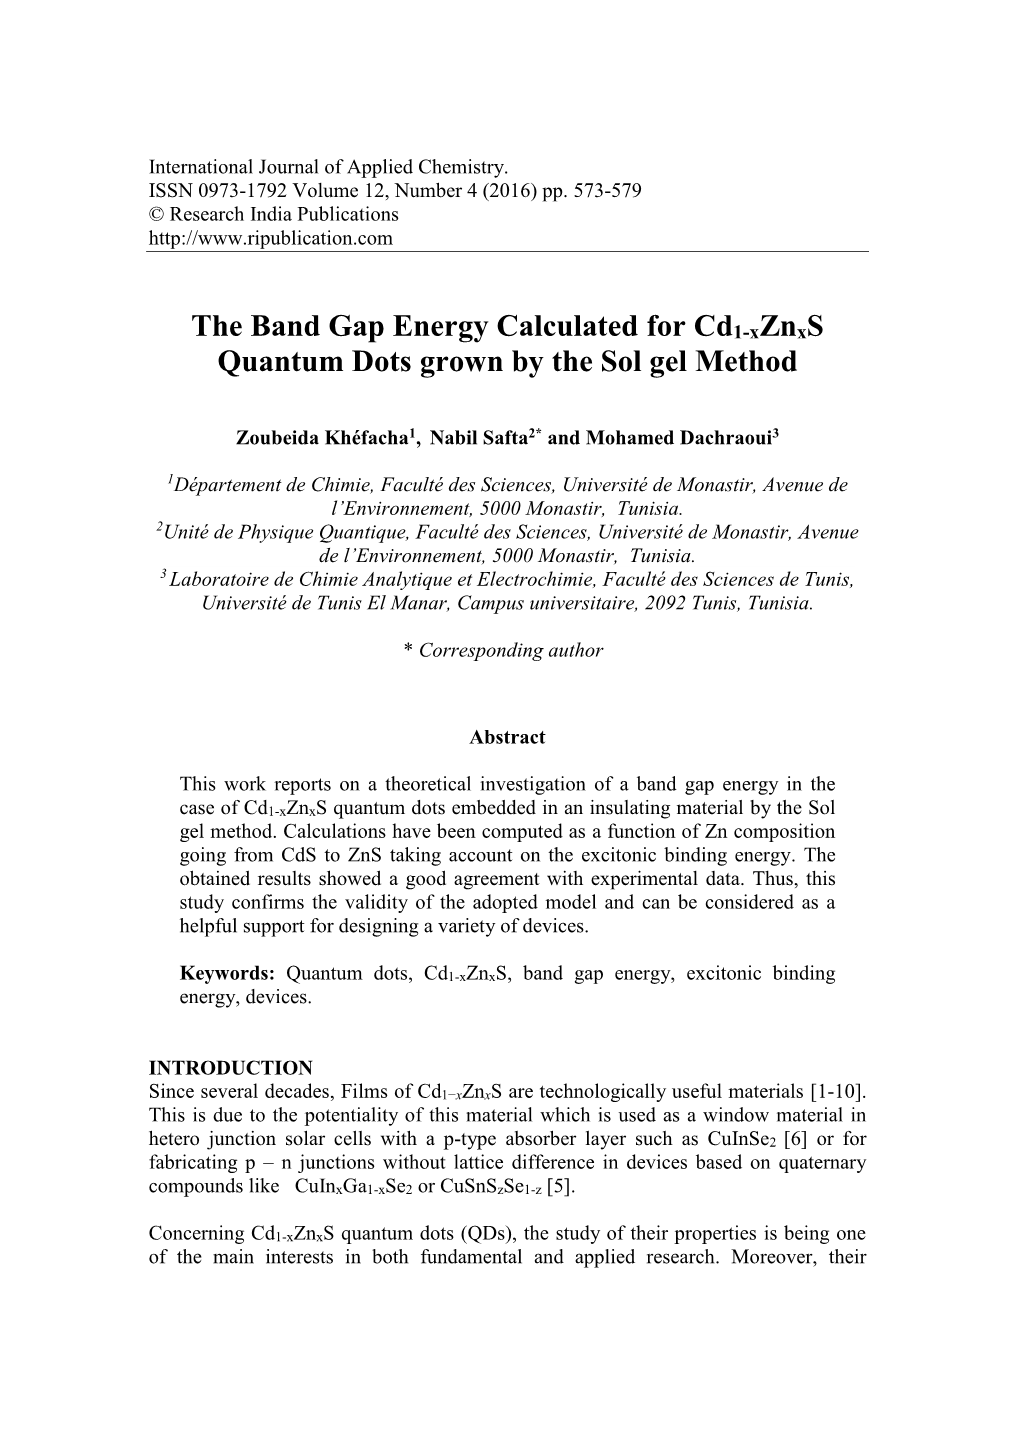 The Band Gap Energy Calculated for Cd1-Xznxs Quantum Dots Grown by the Sol Gel Method